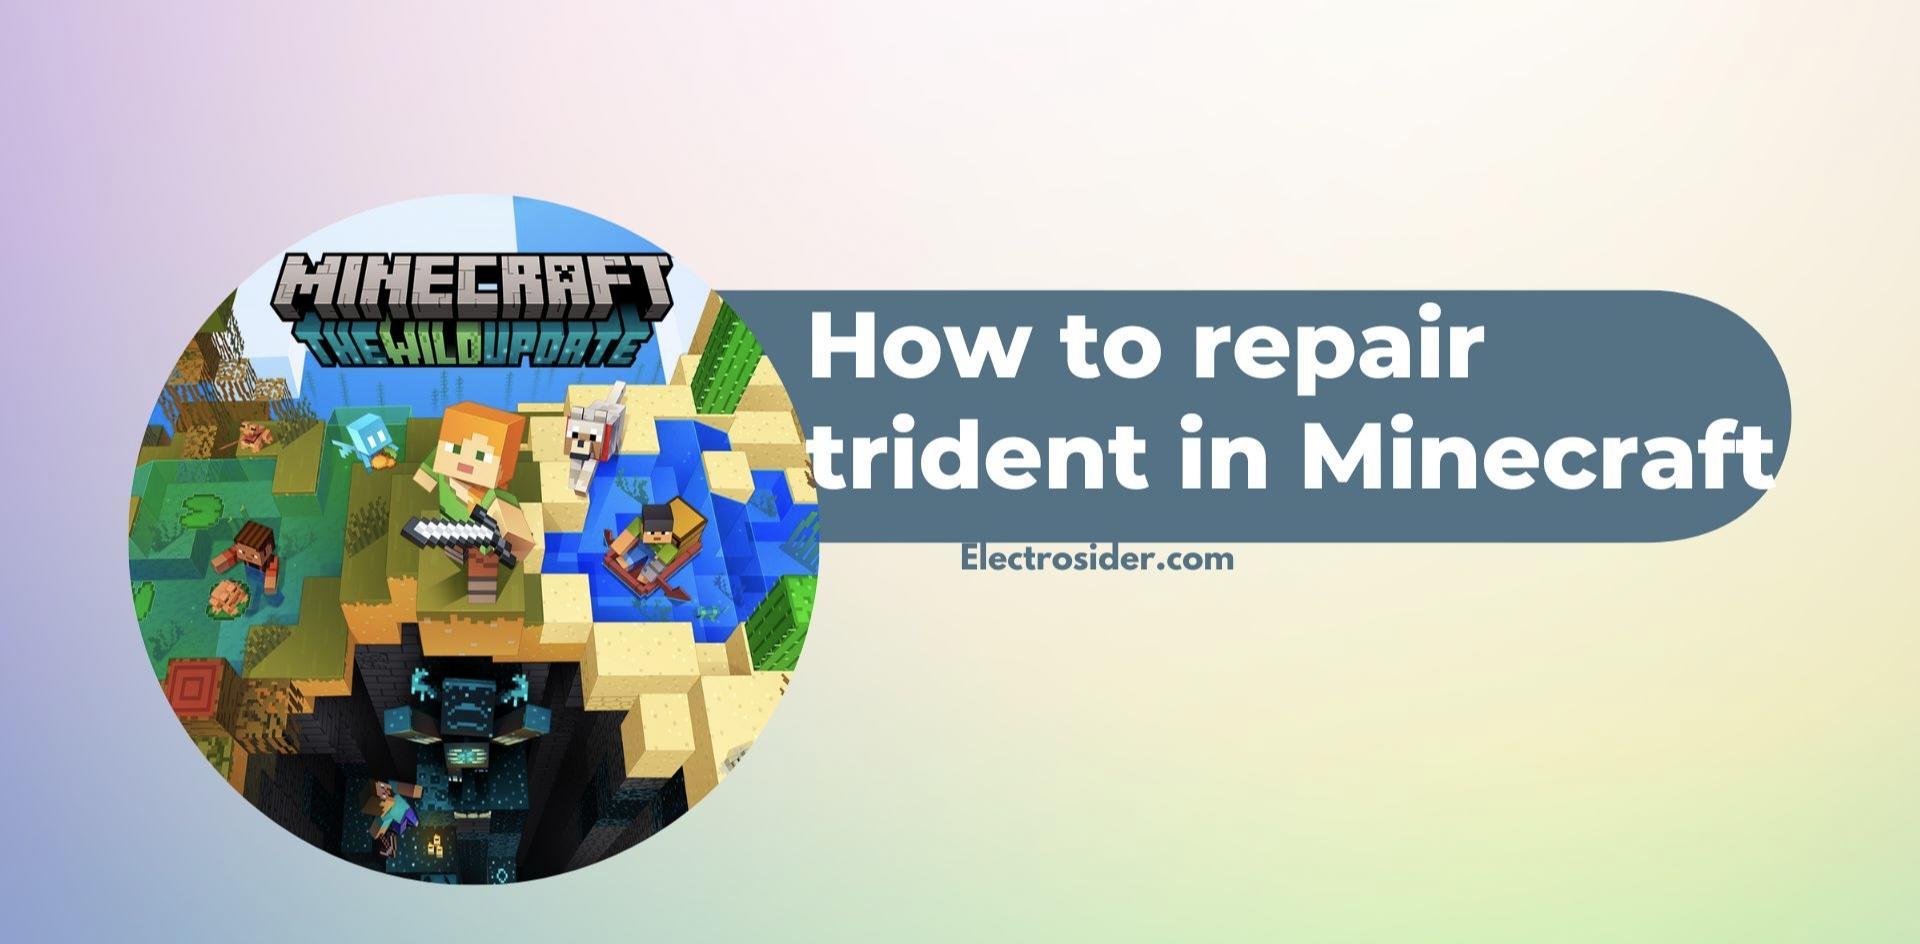 How to repair trident in Minecraft